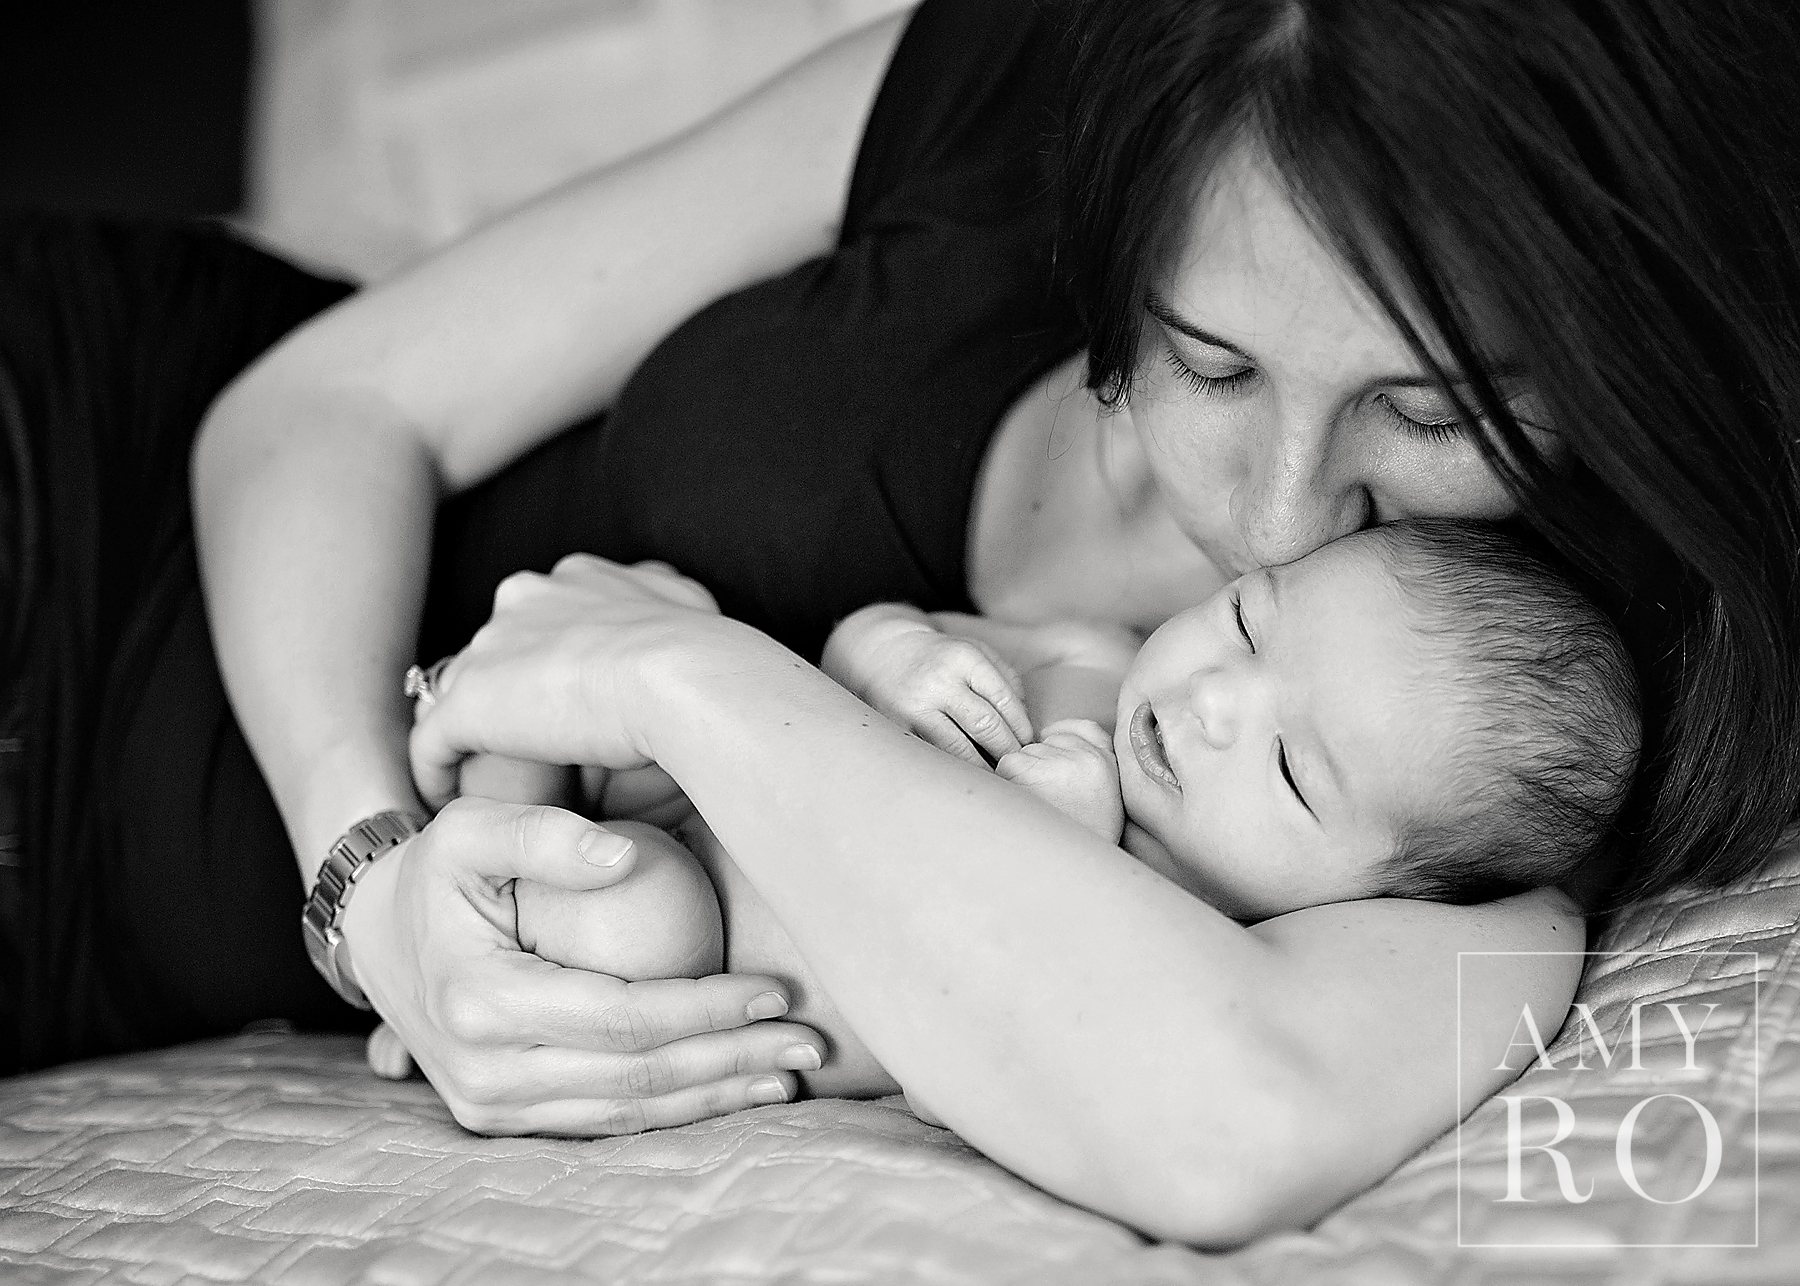 Black and white image of mom snuggling newborn baby on the bed taken during an in-home newborn photography session in Rhode Island